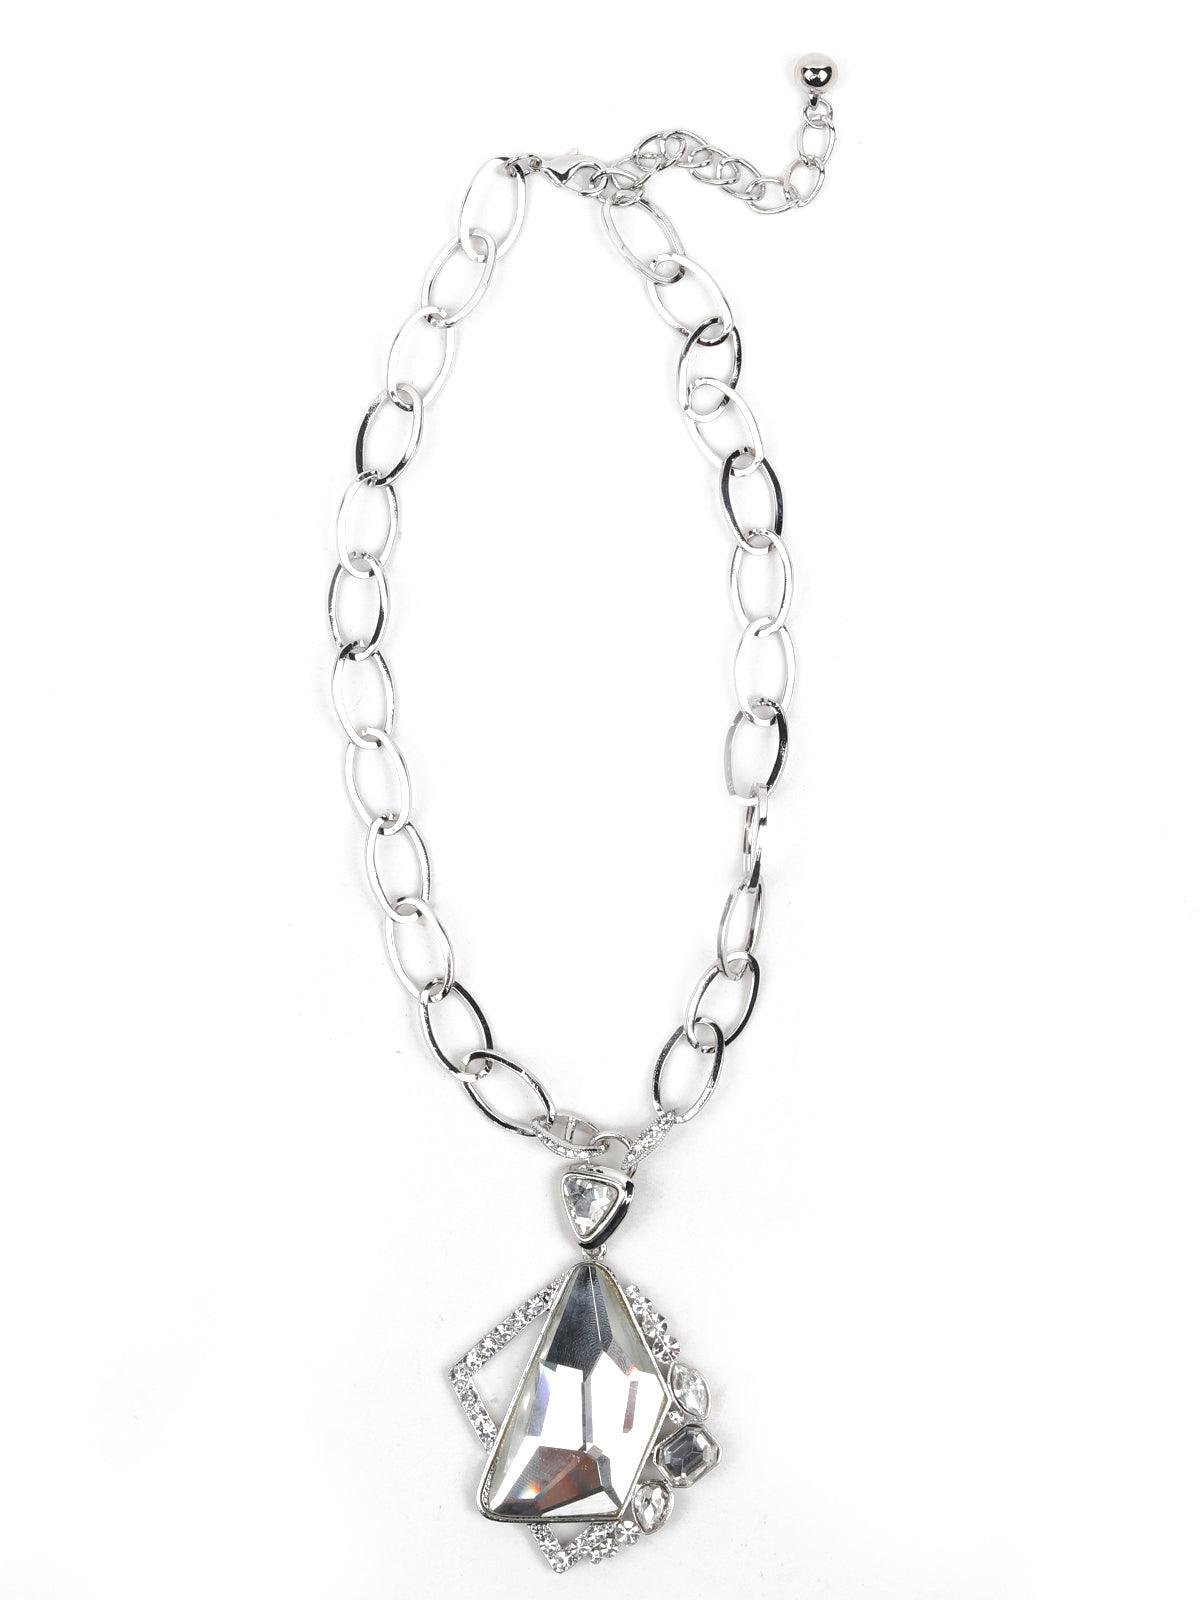 Women's Silver-Tone Textured Pearl Statement Necklace - Odette